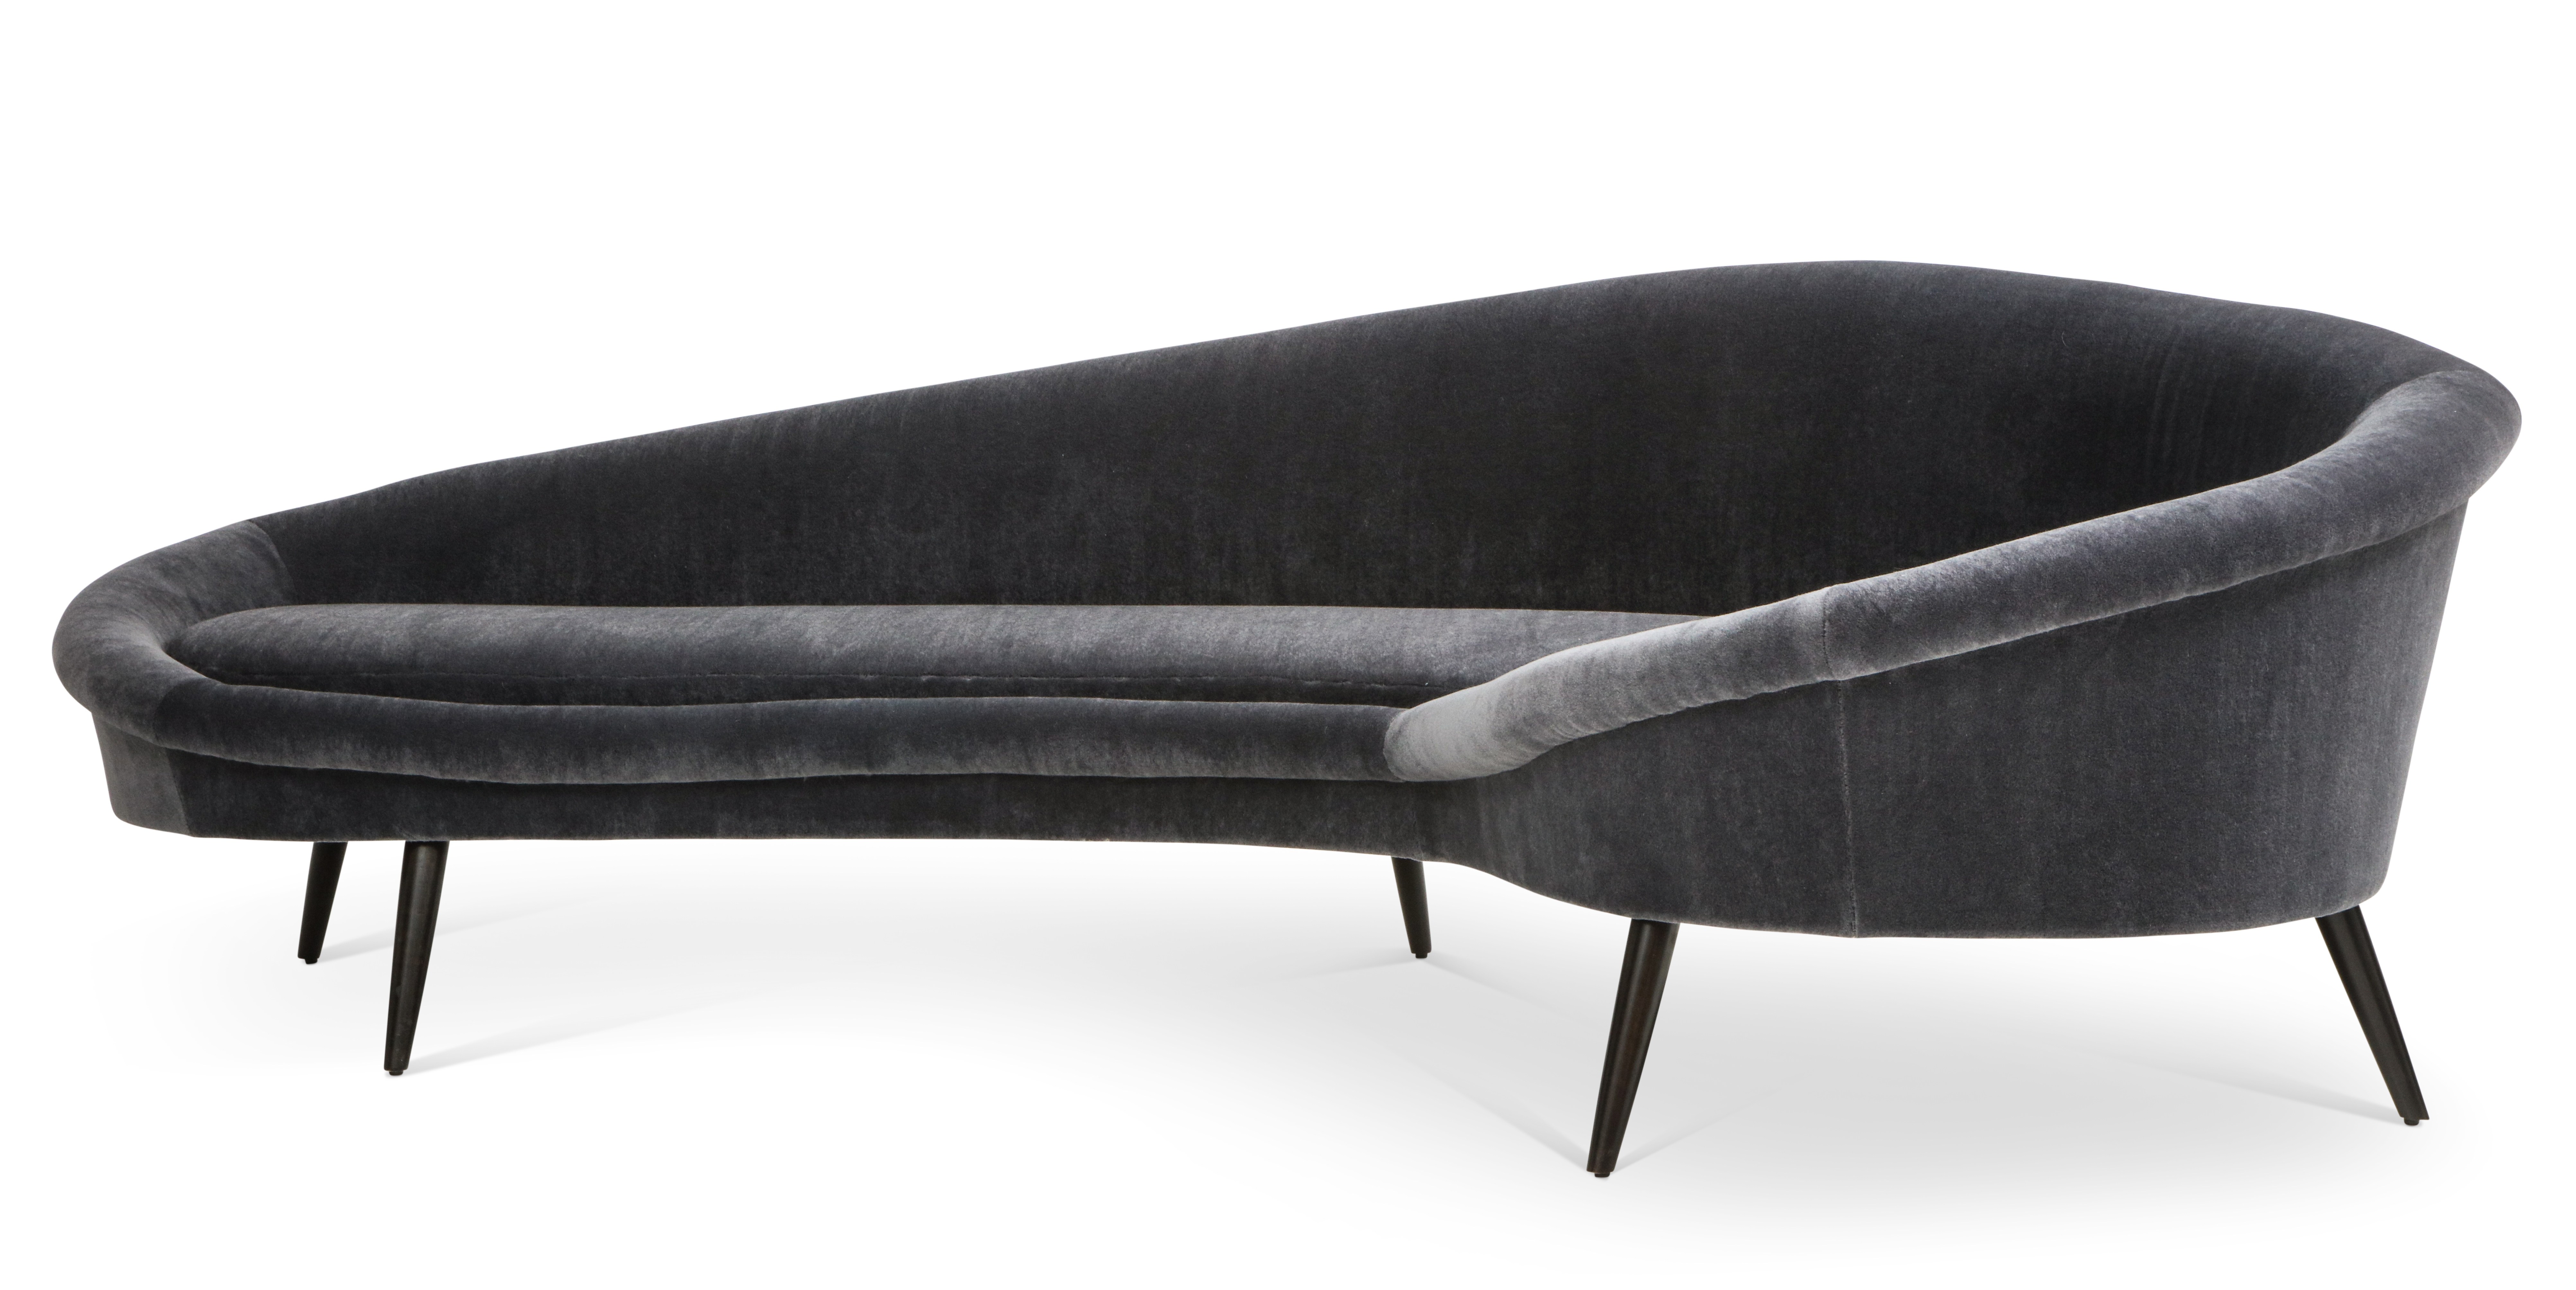 Mid Century Style Curved Sofa, Organic-form. Re-upholstered